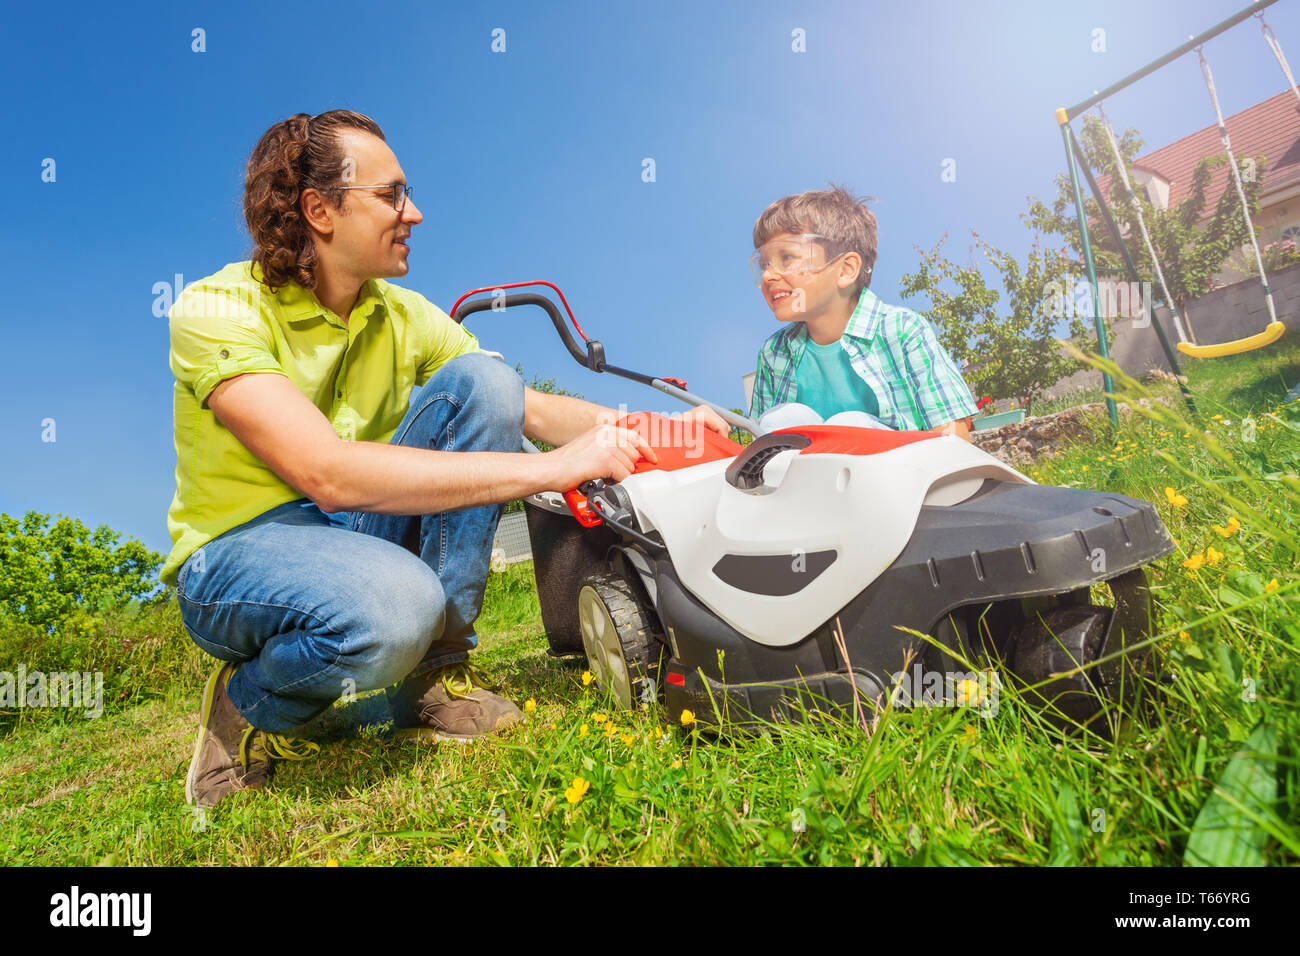 Young father and his son working together at the garden, cutting grass using lawnmower at sunny day Stock Photo